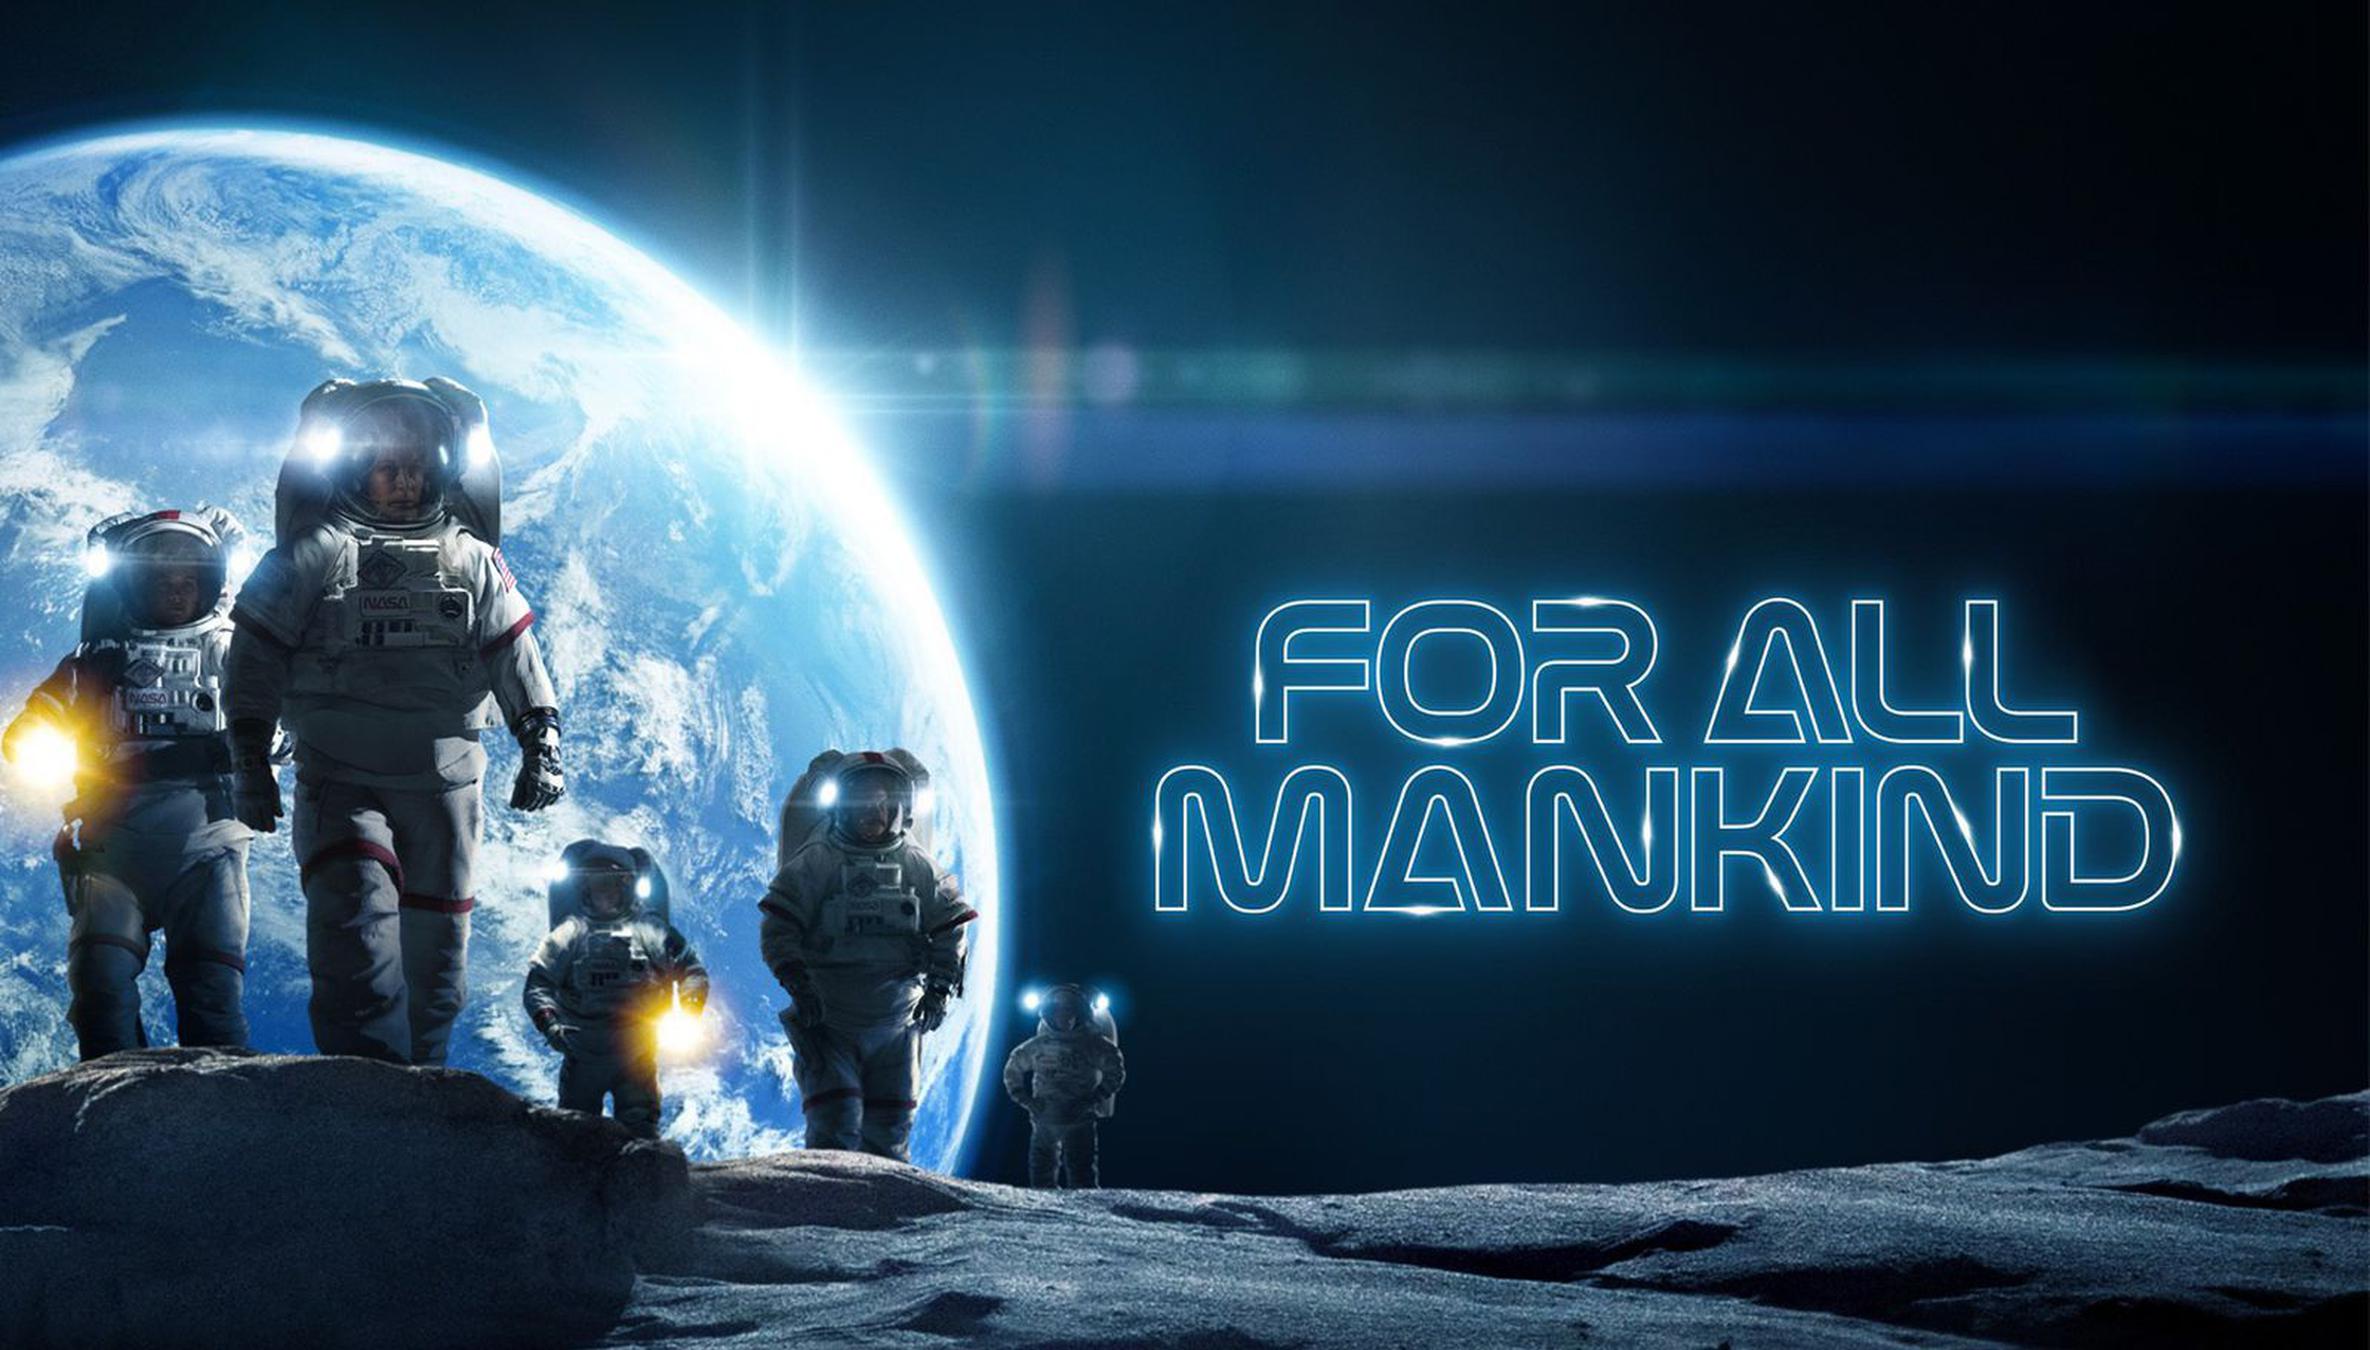 L.A. What’s Filming: Season 3 of Apple TV+’s ‘For All Mankind’